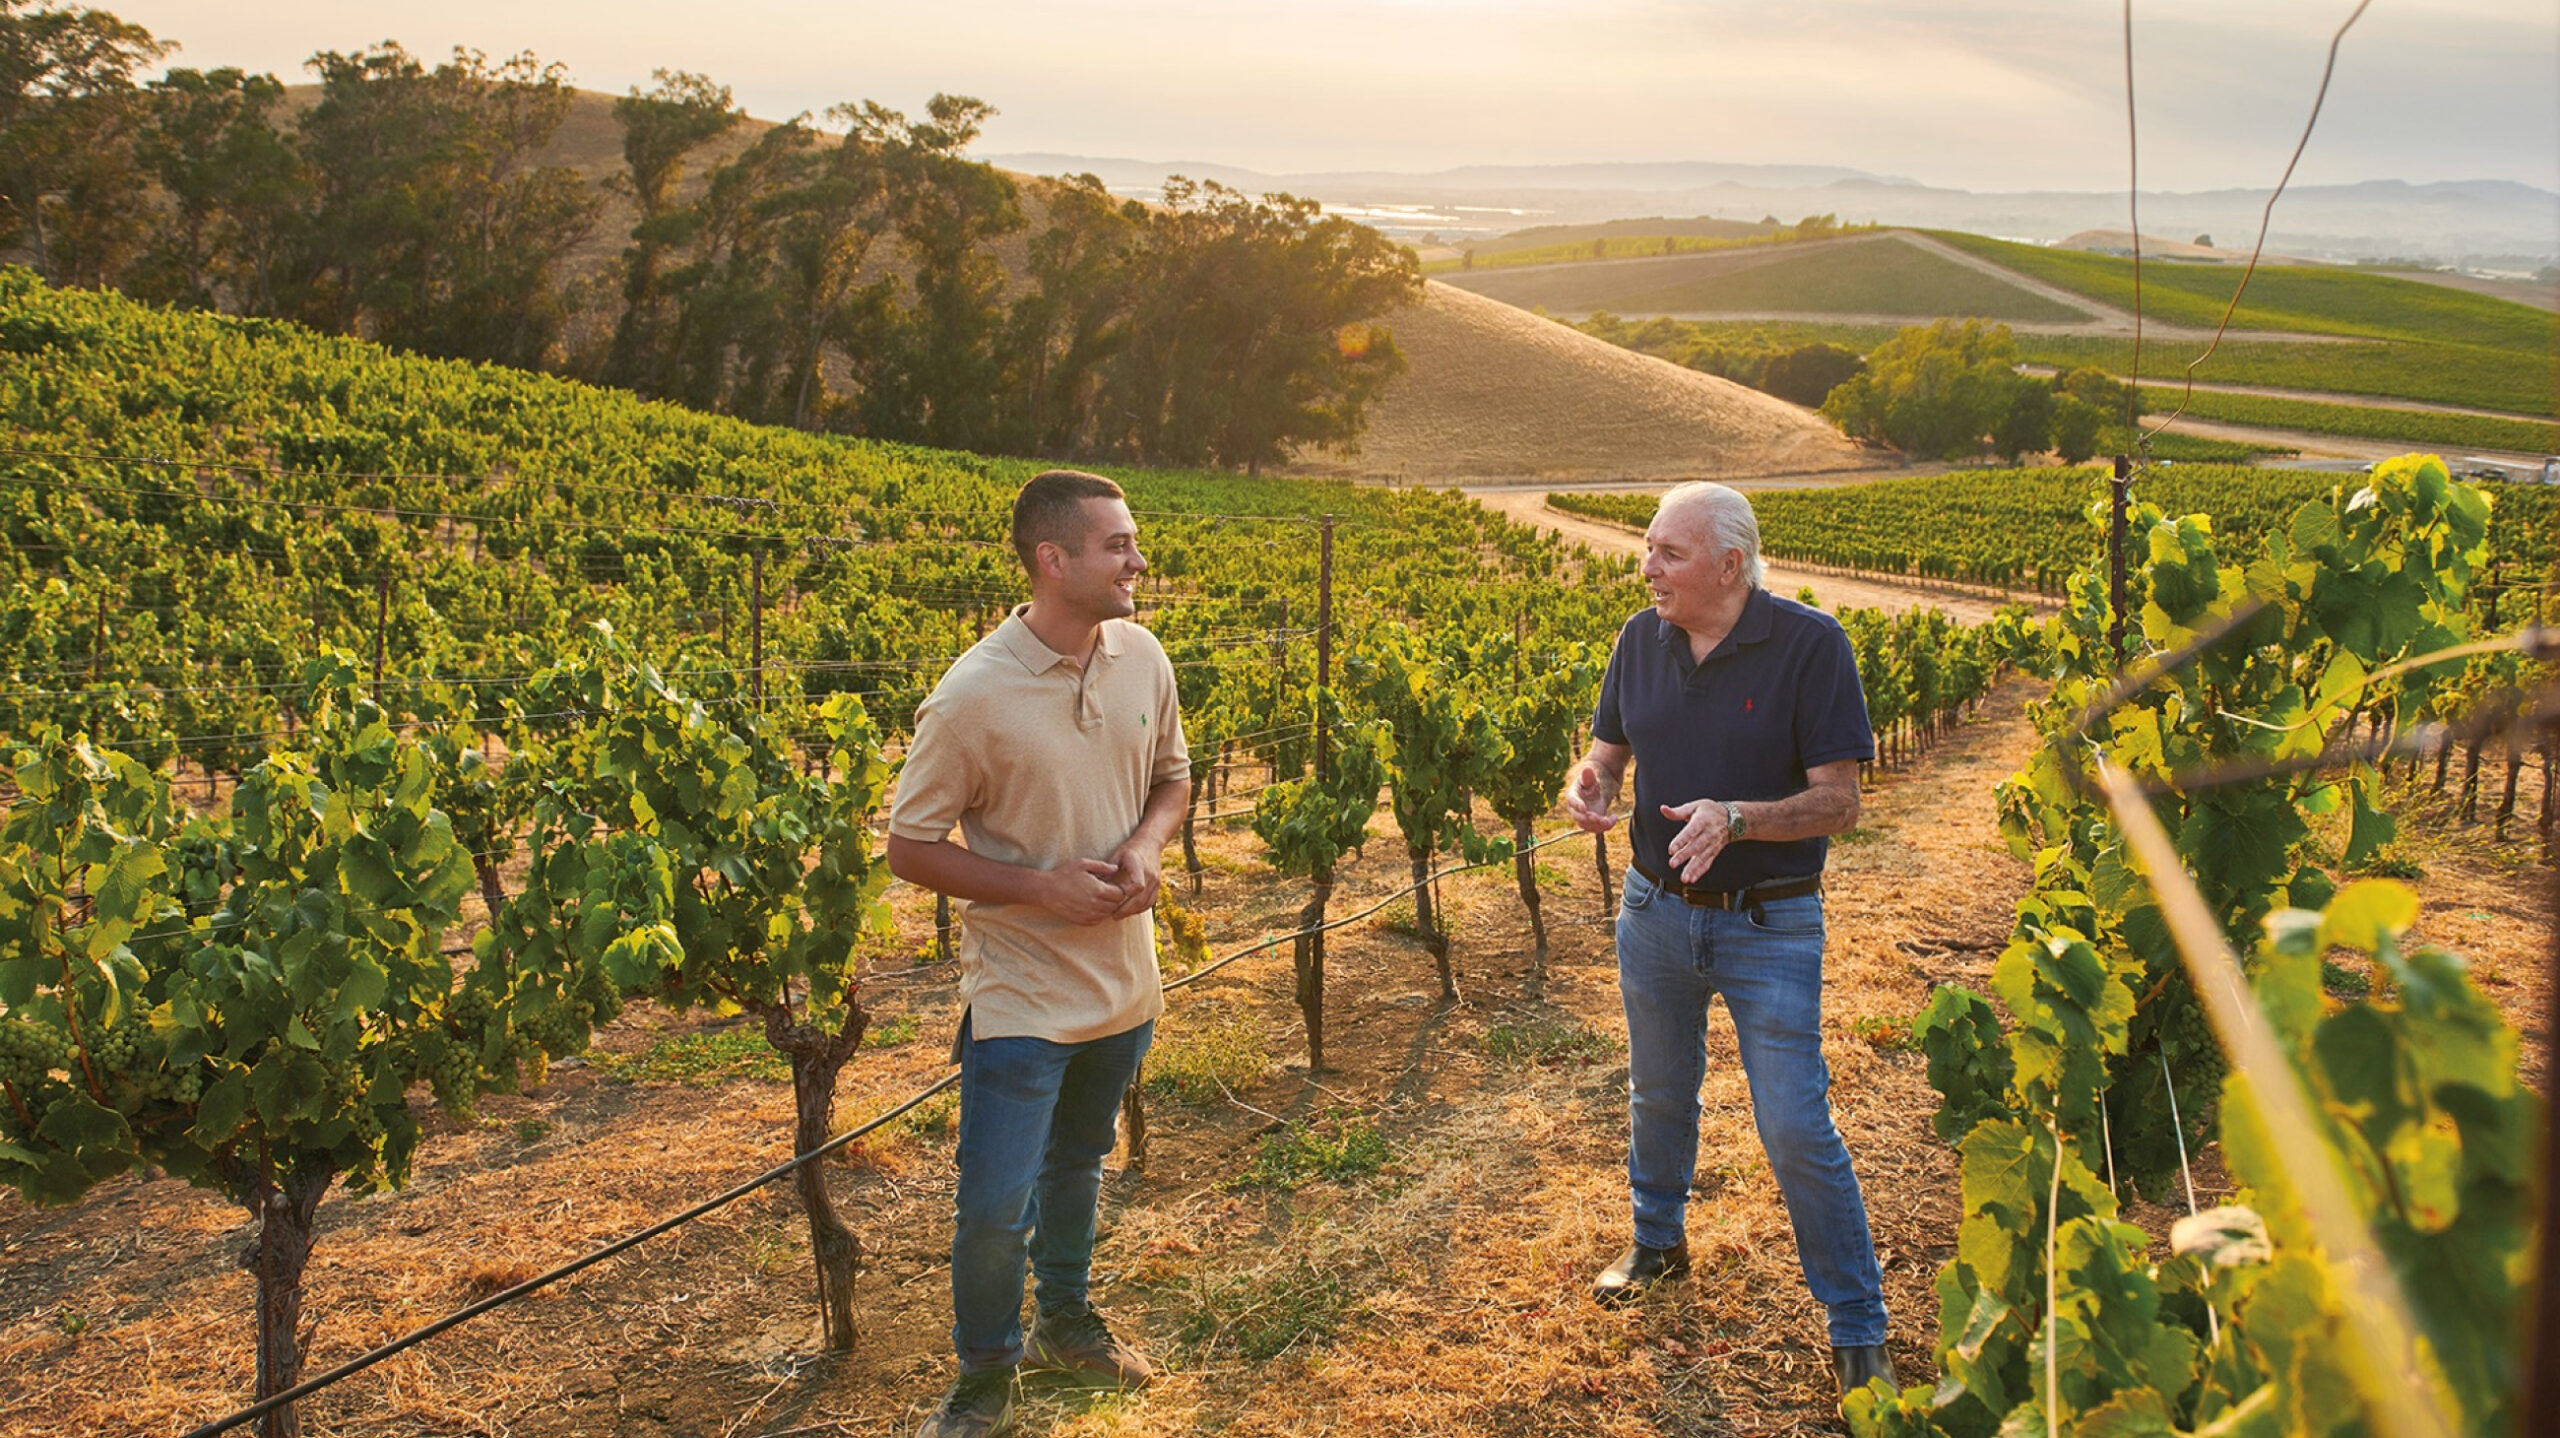 Protege winemakers Mike Chelini and Mathew Torres talking in the beautiful vineyard of Protege winery